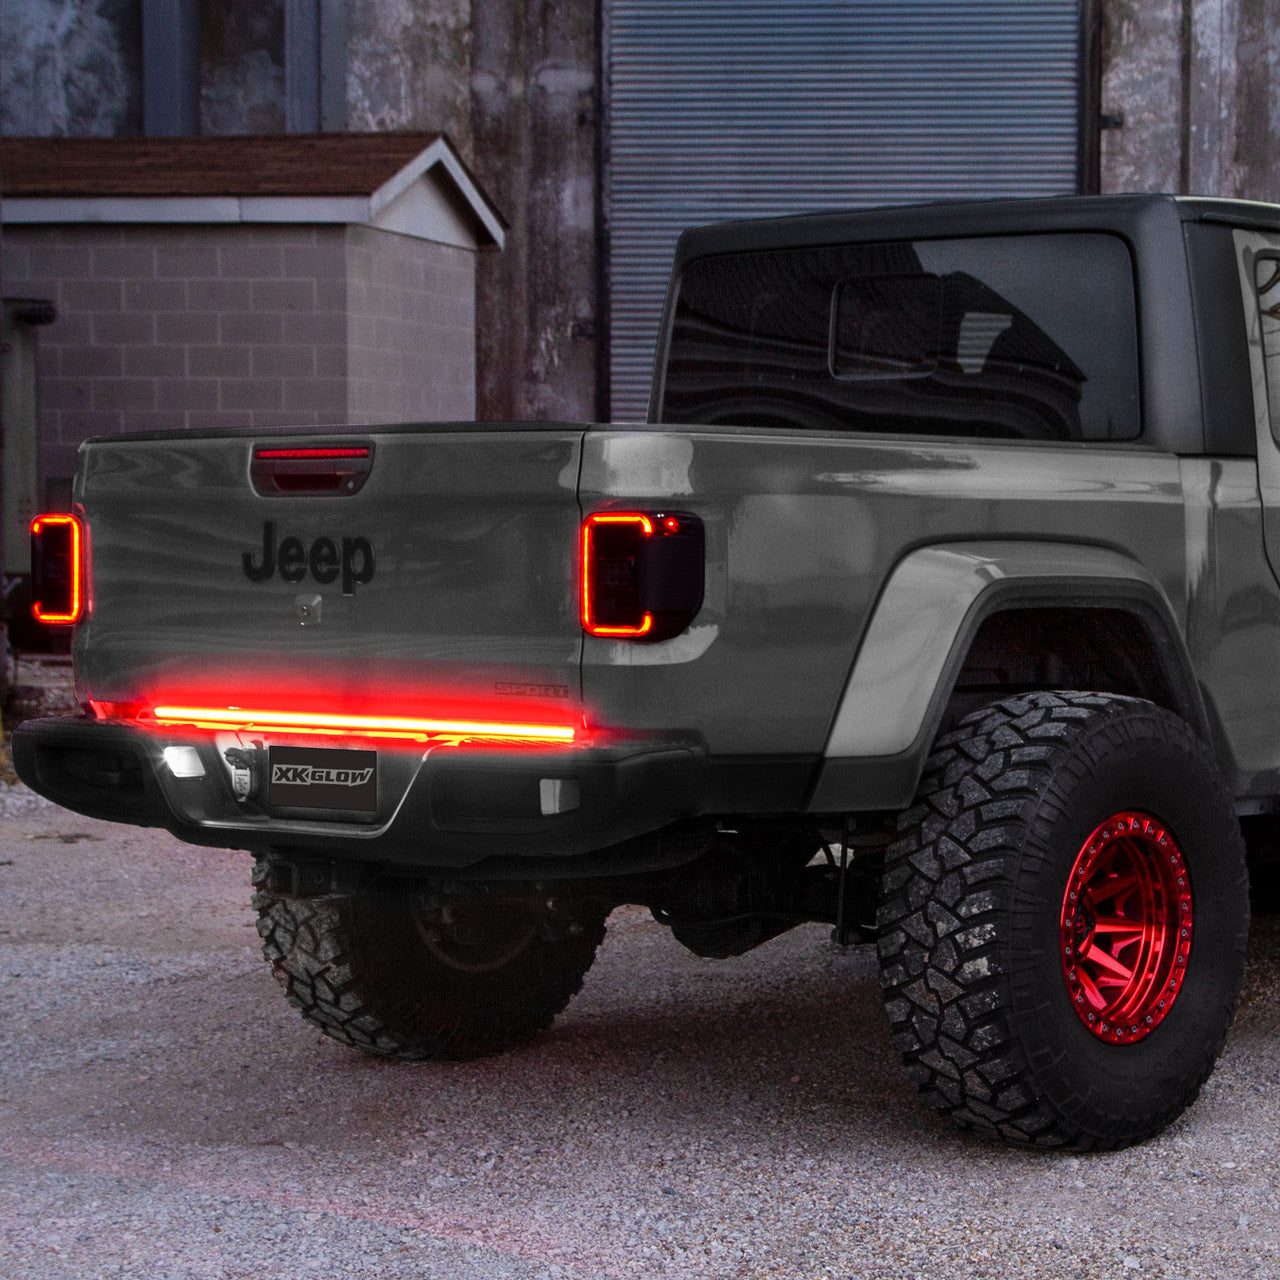 XKGlow Truck Tailgate LED Light Bar with Sequential Turn Signal